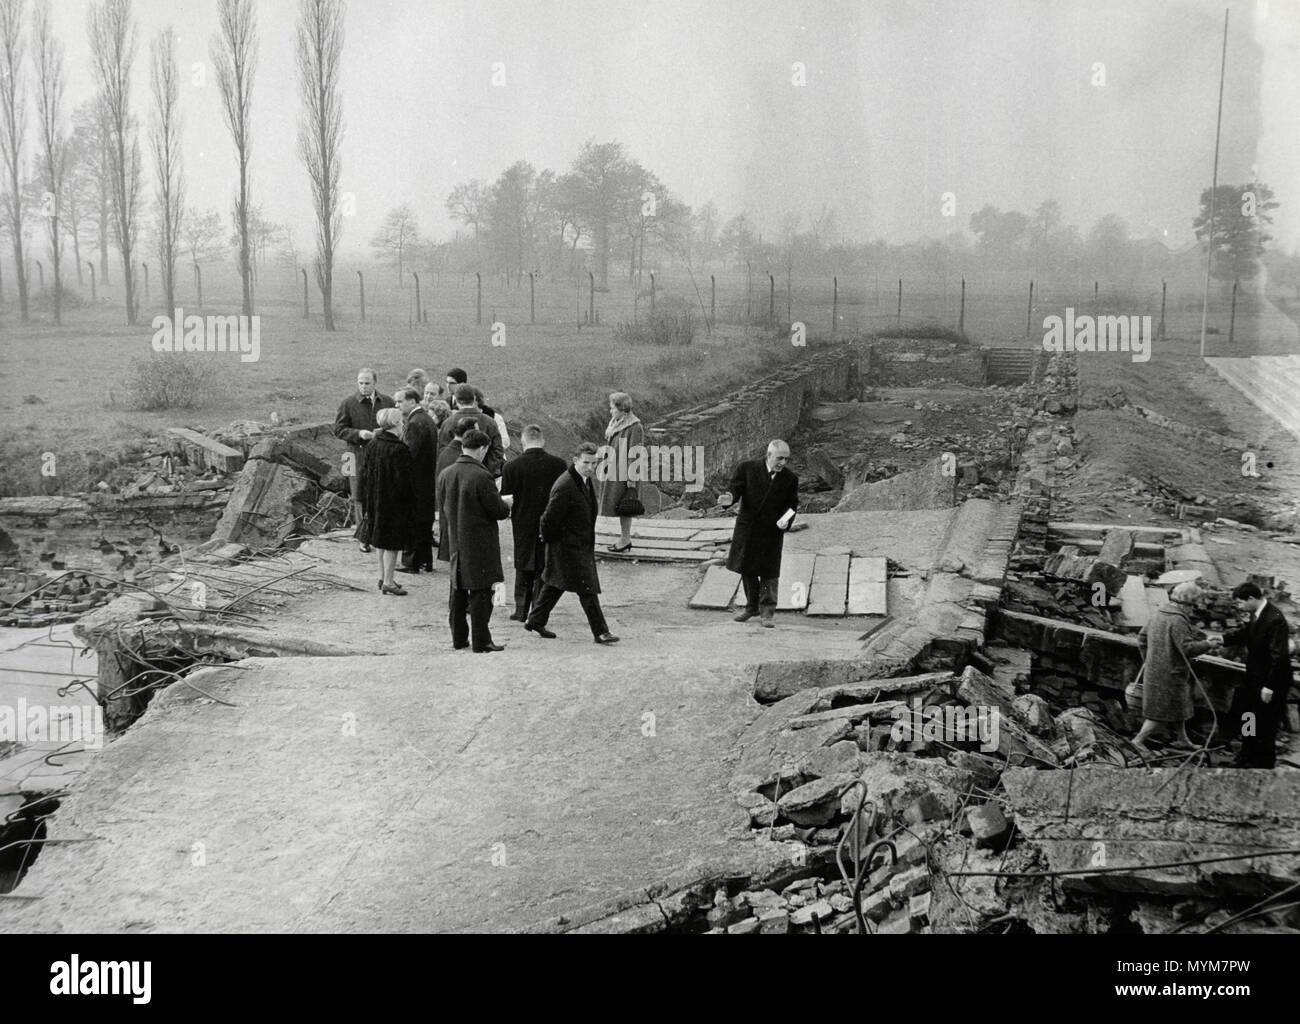 Politicians visiting concentration camps after WW2, Auschwitz, Poland 1940s Stock Photo